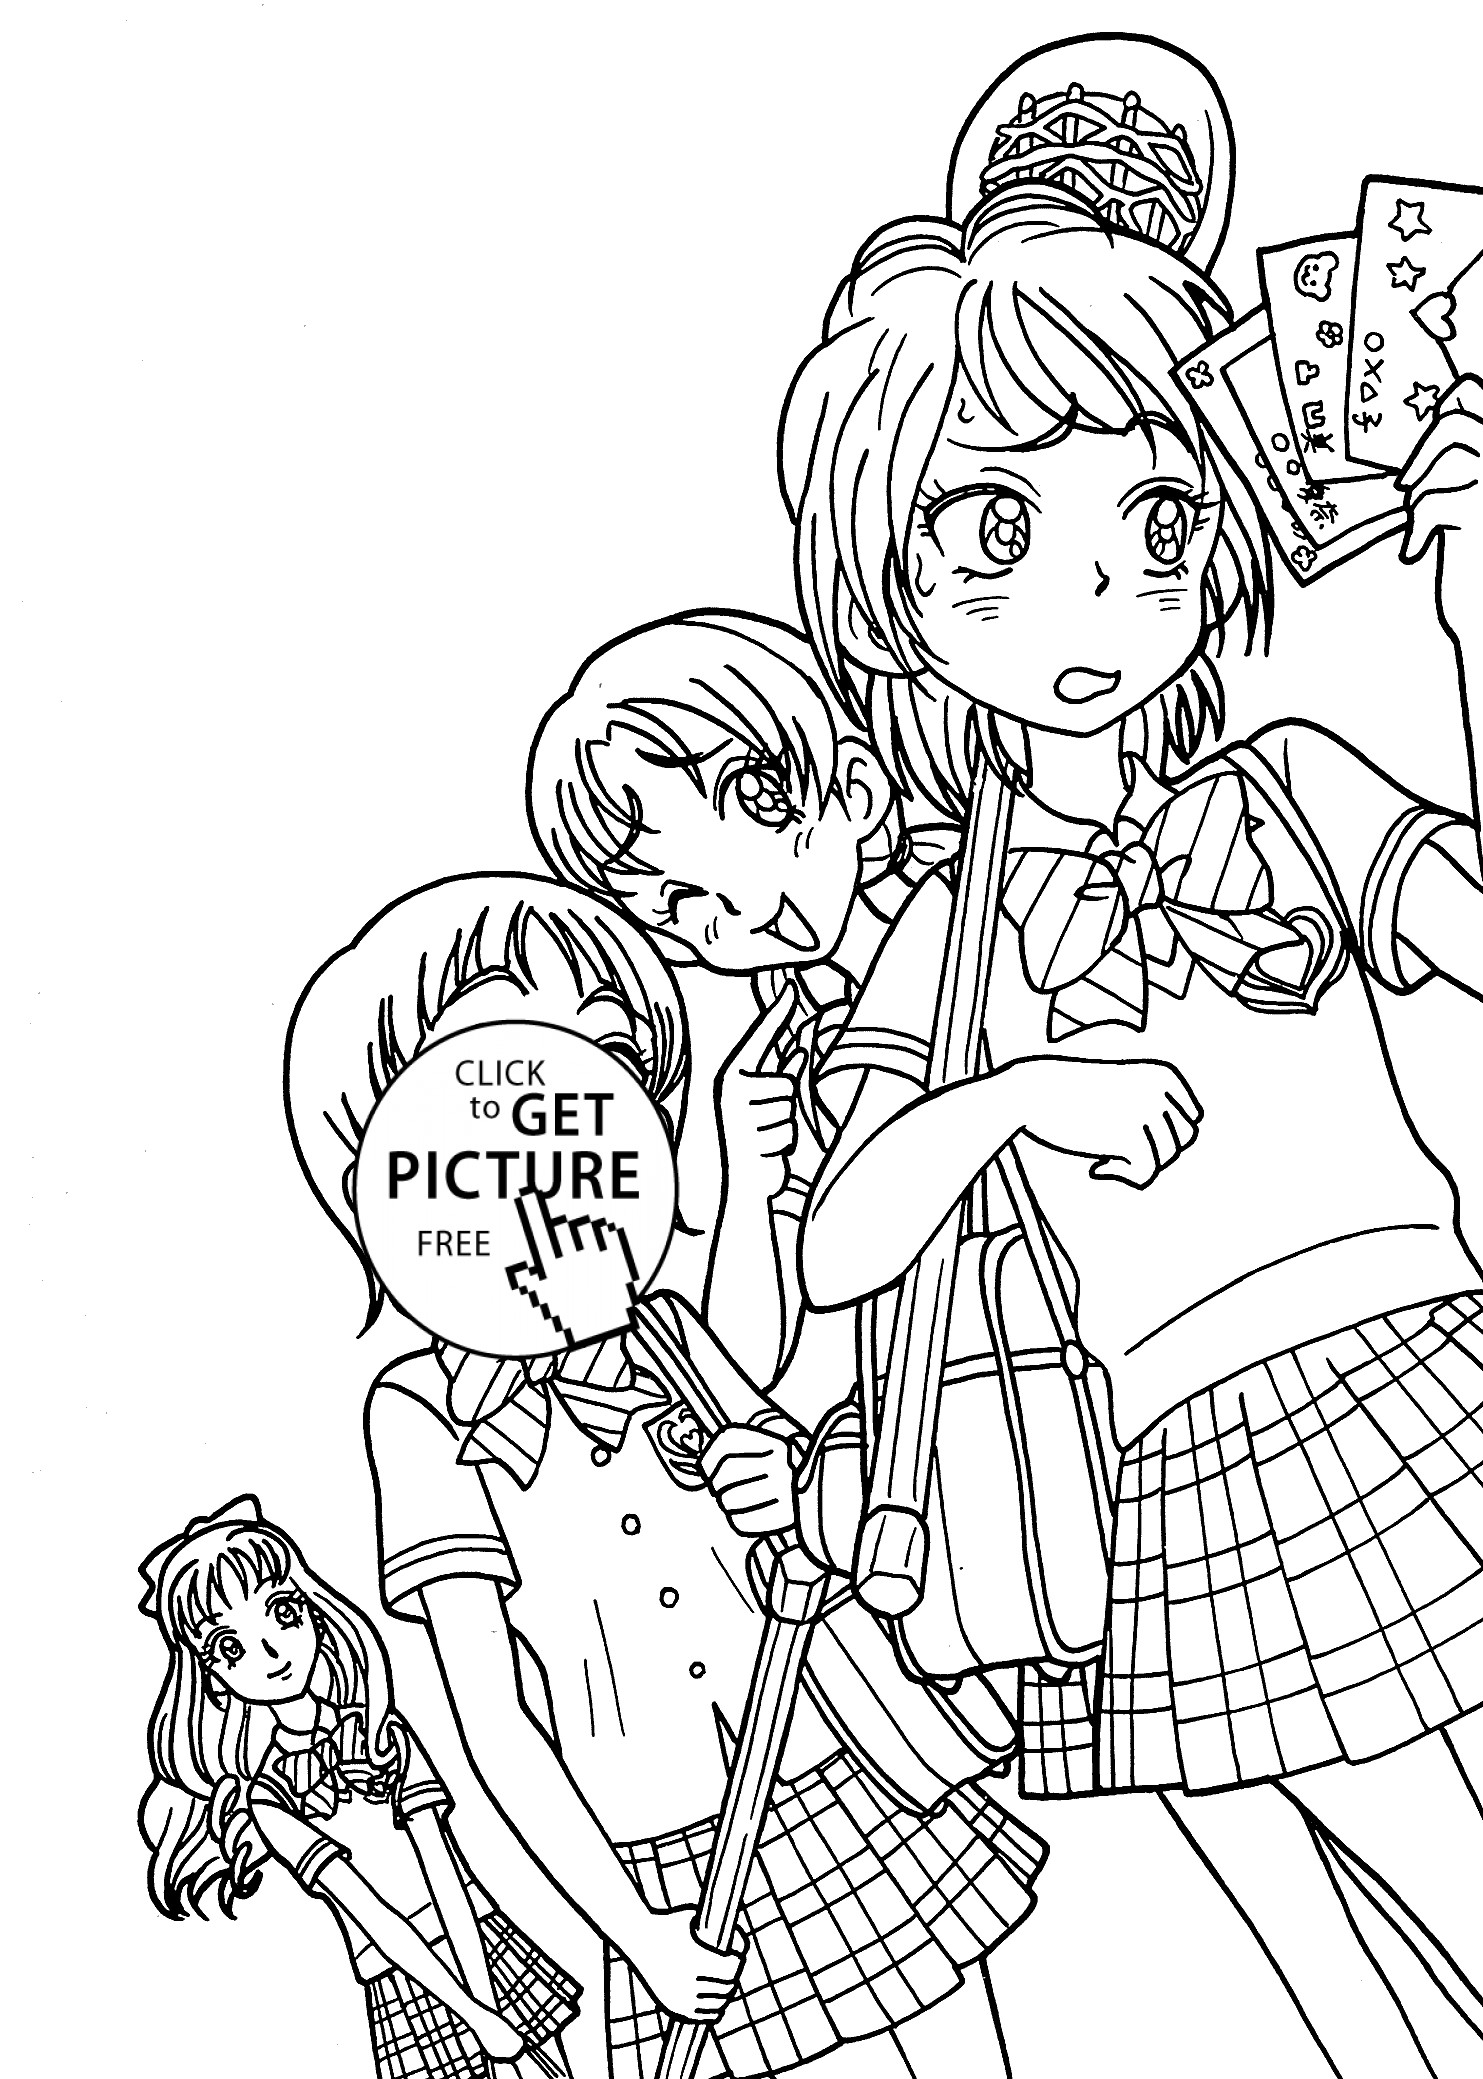 Anime Coloring Pages For Kids
 Girls from Pretty cure anime coloring pages for kids